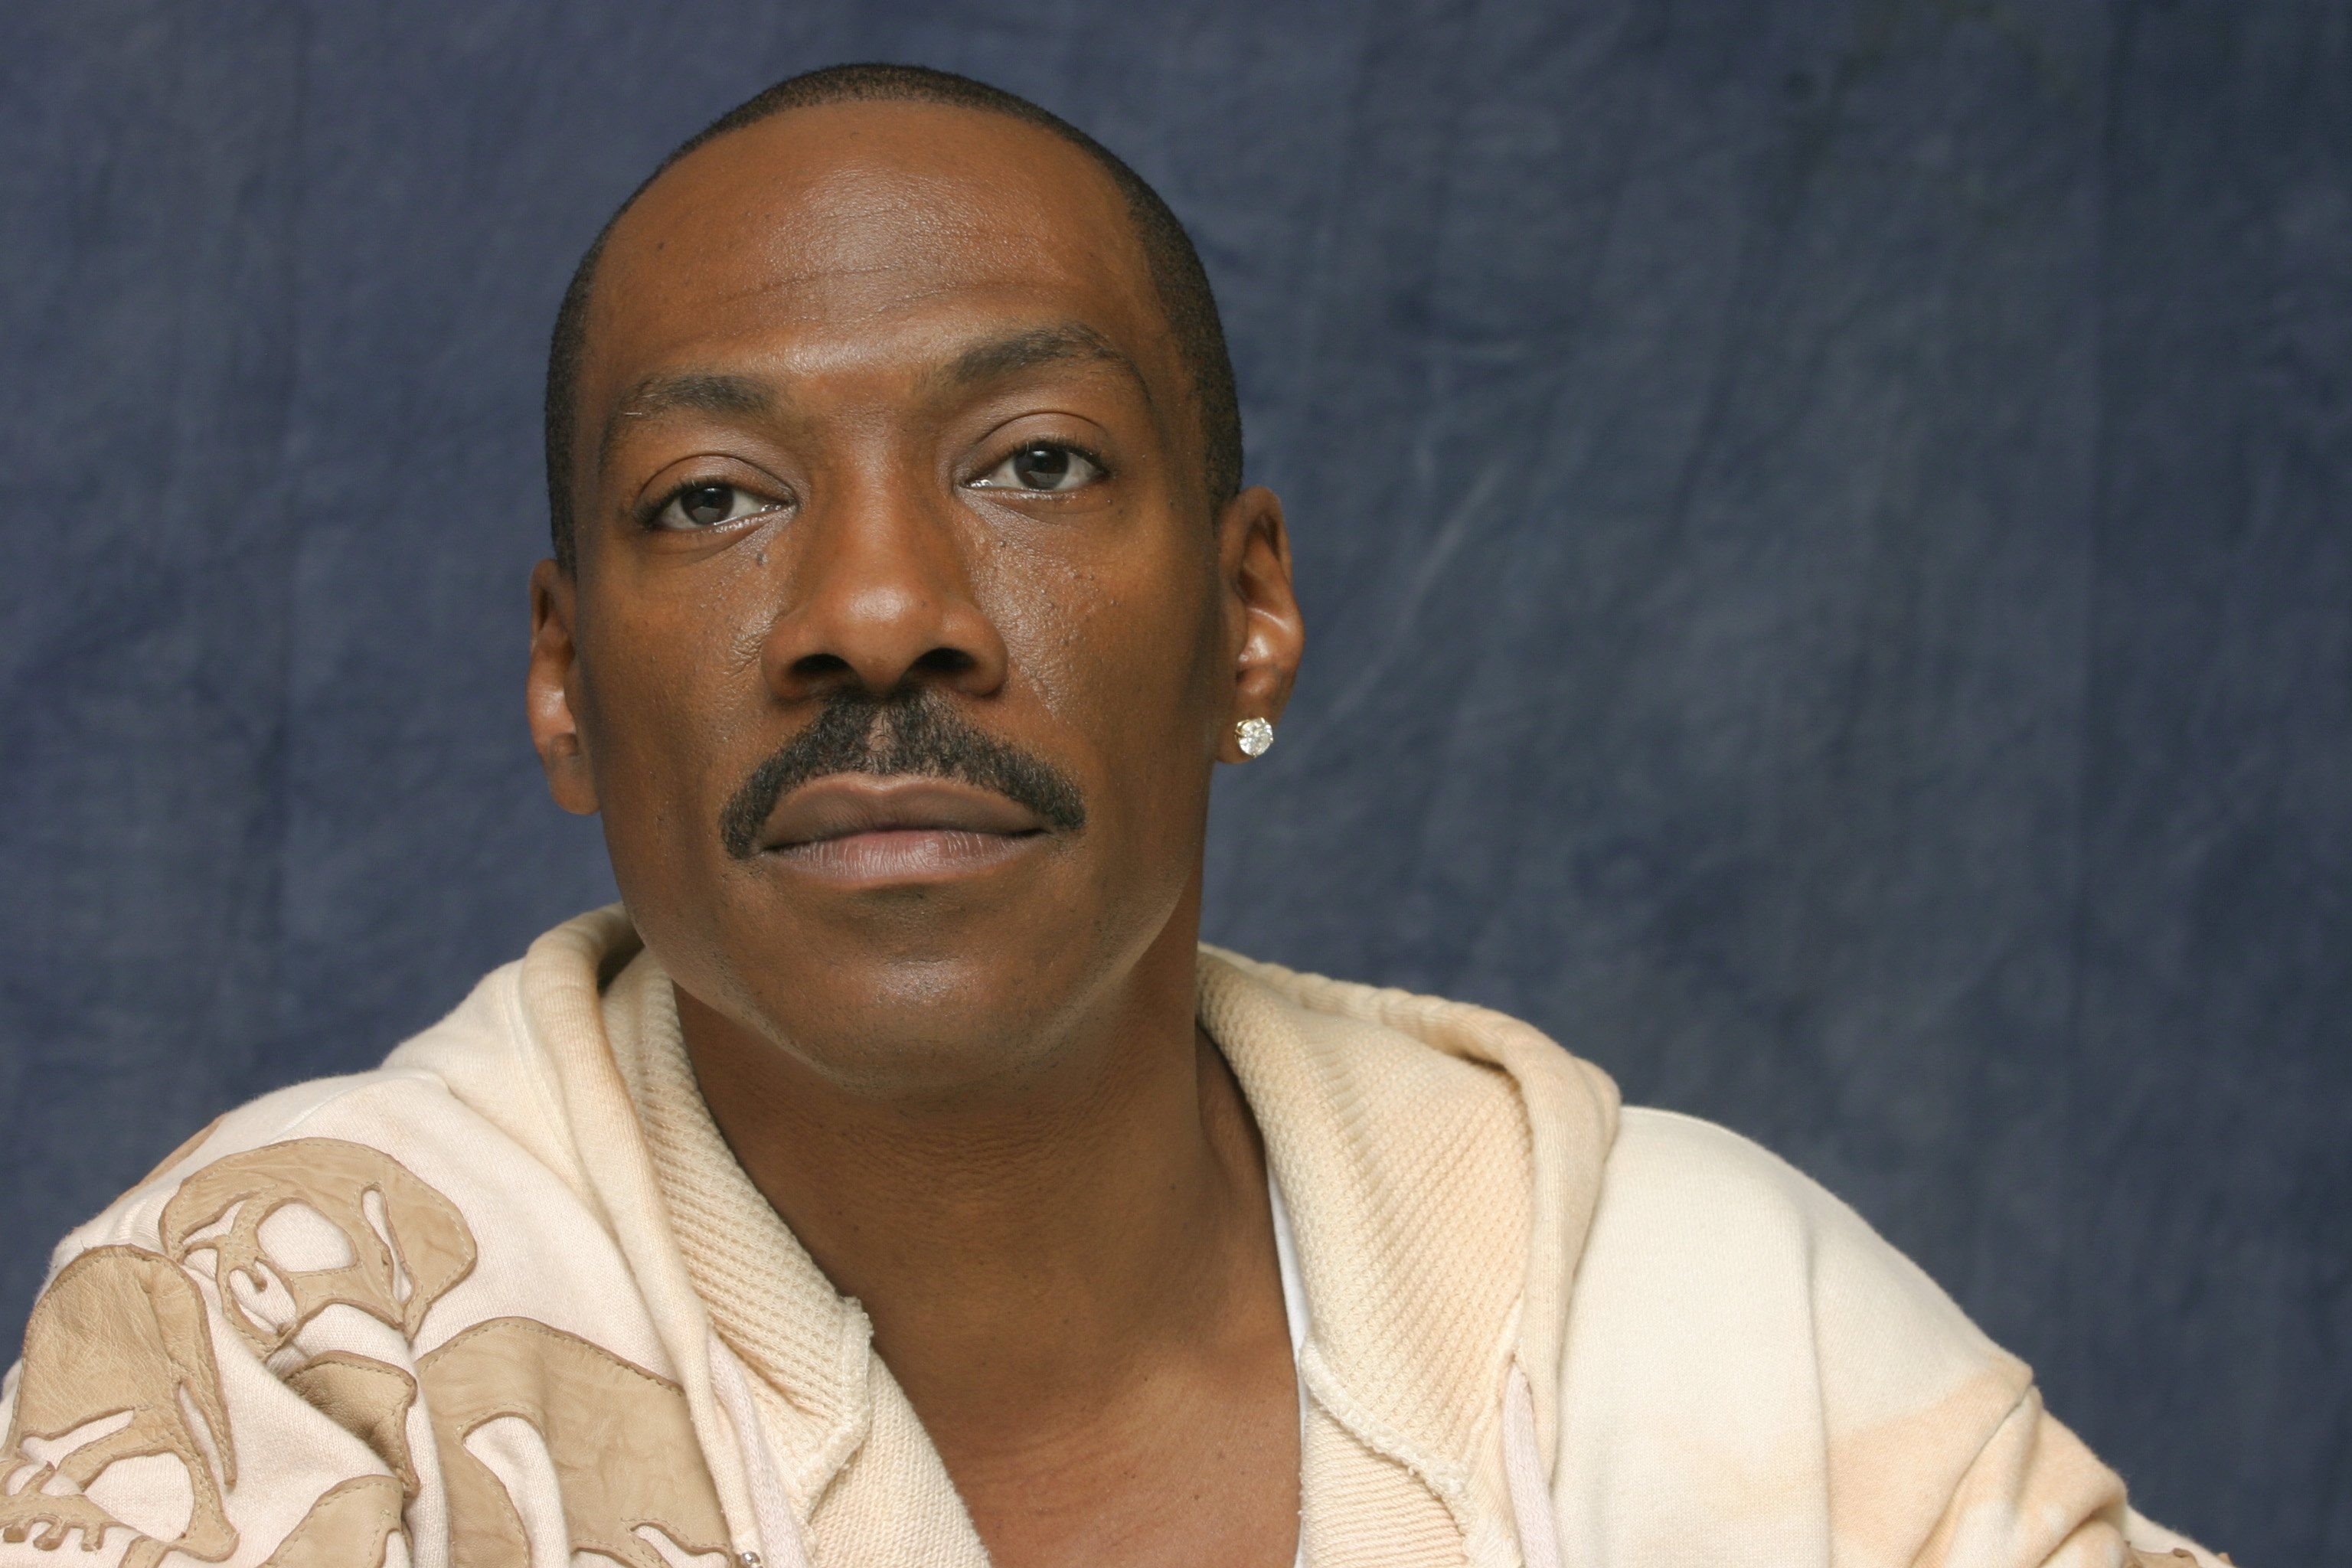 Actor Eddie Murphy's portrait session for his film "Shrek the Third" in Los Angeles, California in 2007. | Photo: Getty Images